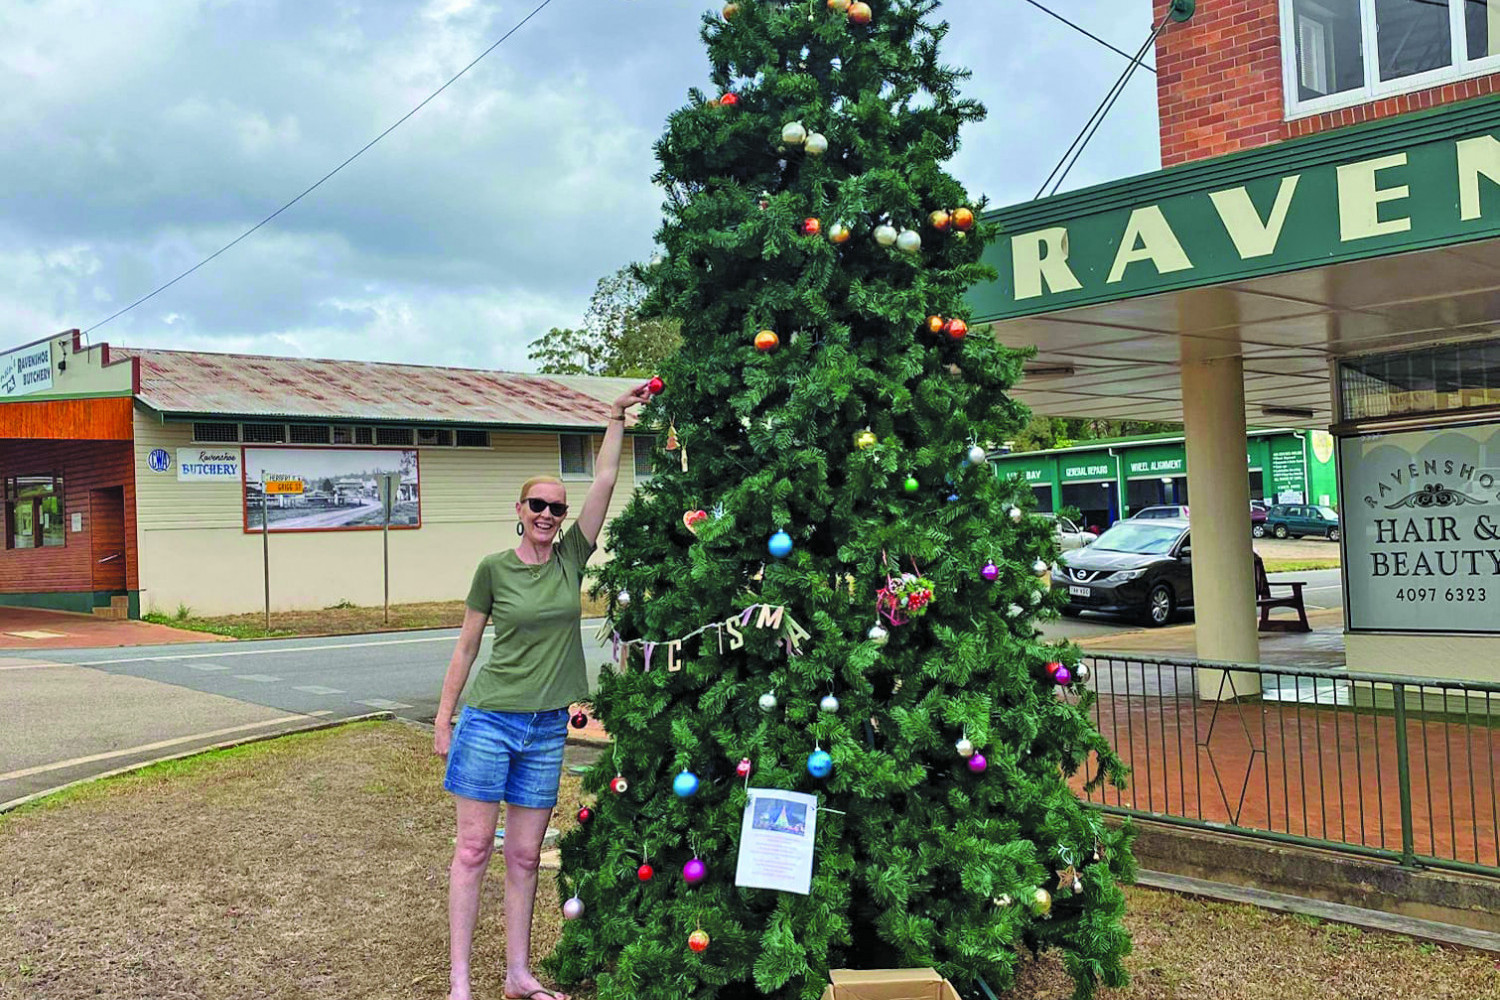 Primary School teacher Justine McDonnell showing how many decorations and baubles had been donated to the Ravenshoe Community Christmas Tree